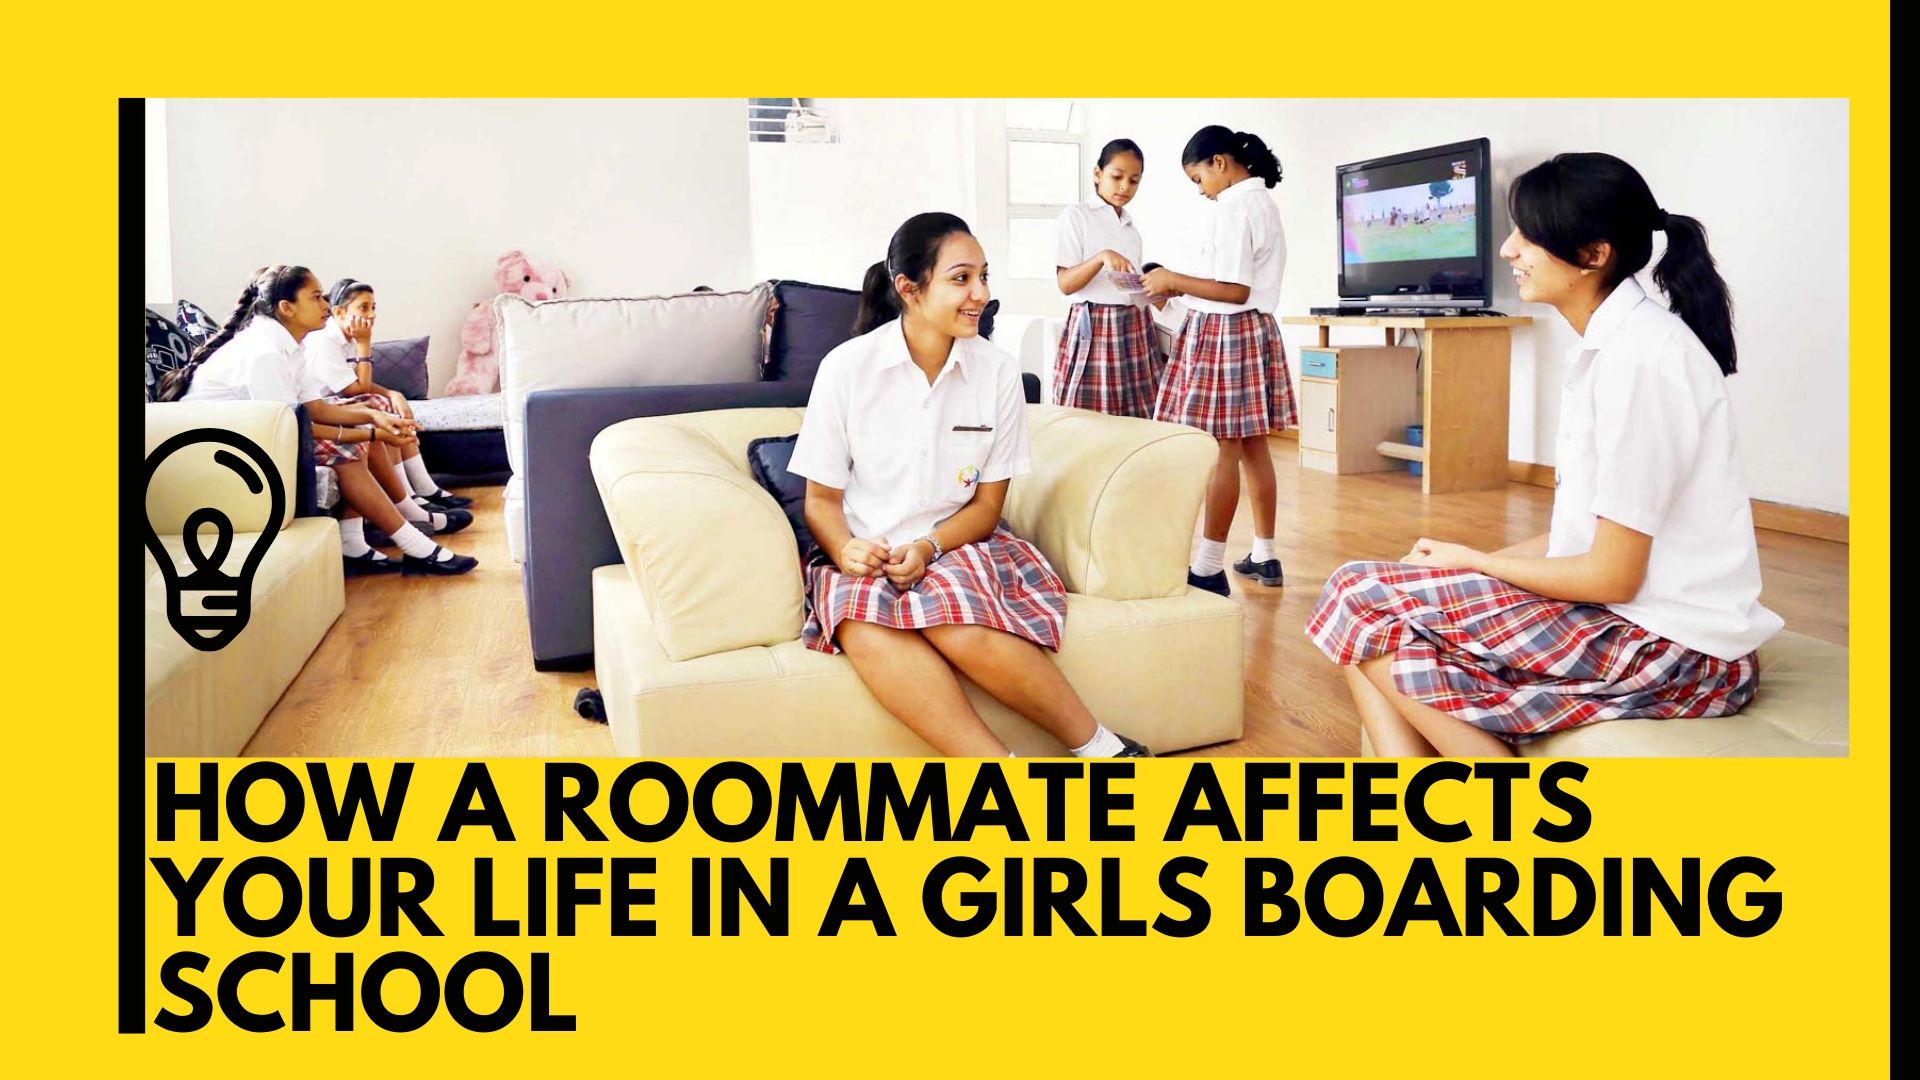 You are currently viewing HOW A ROOMMATE AFFECTS YOUR LIFE IN A GIRLS BOARDING SCHOOL